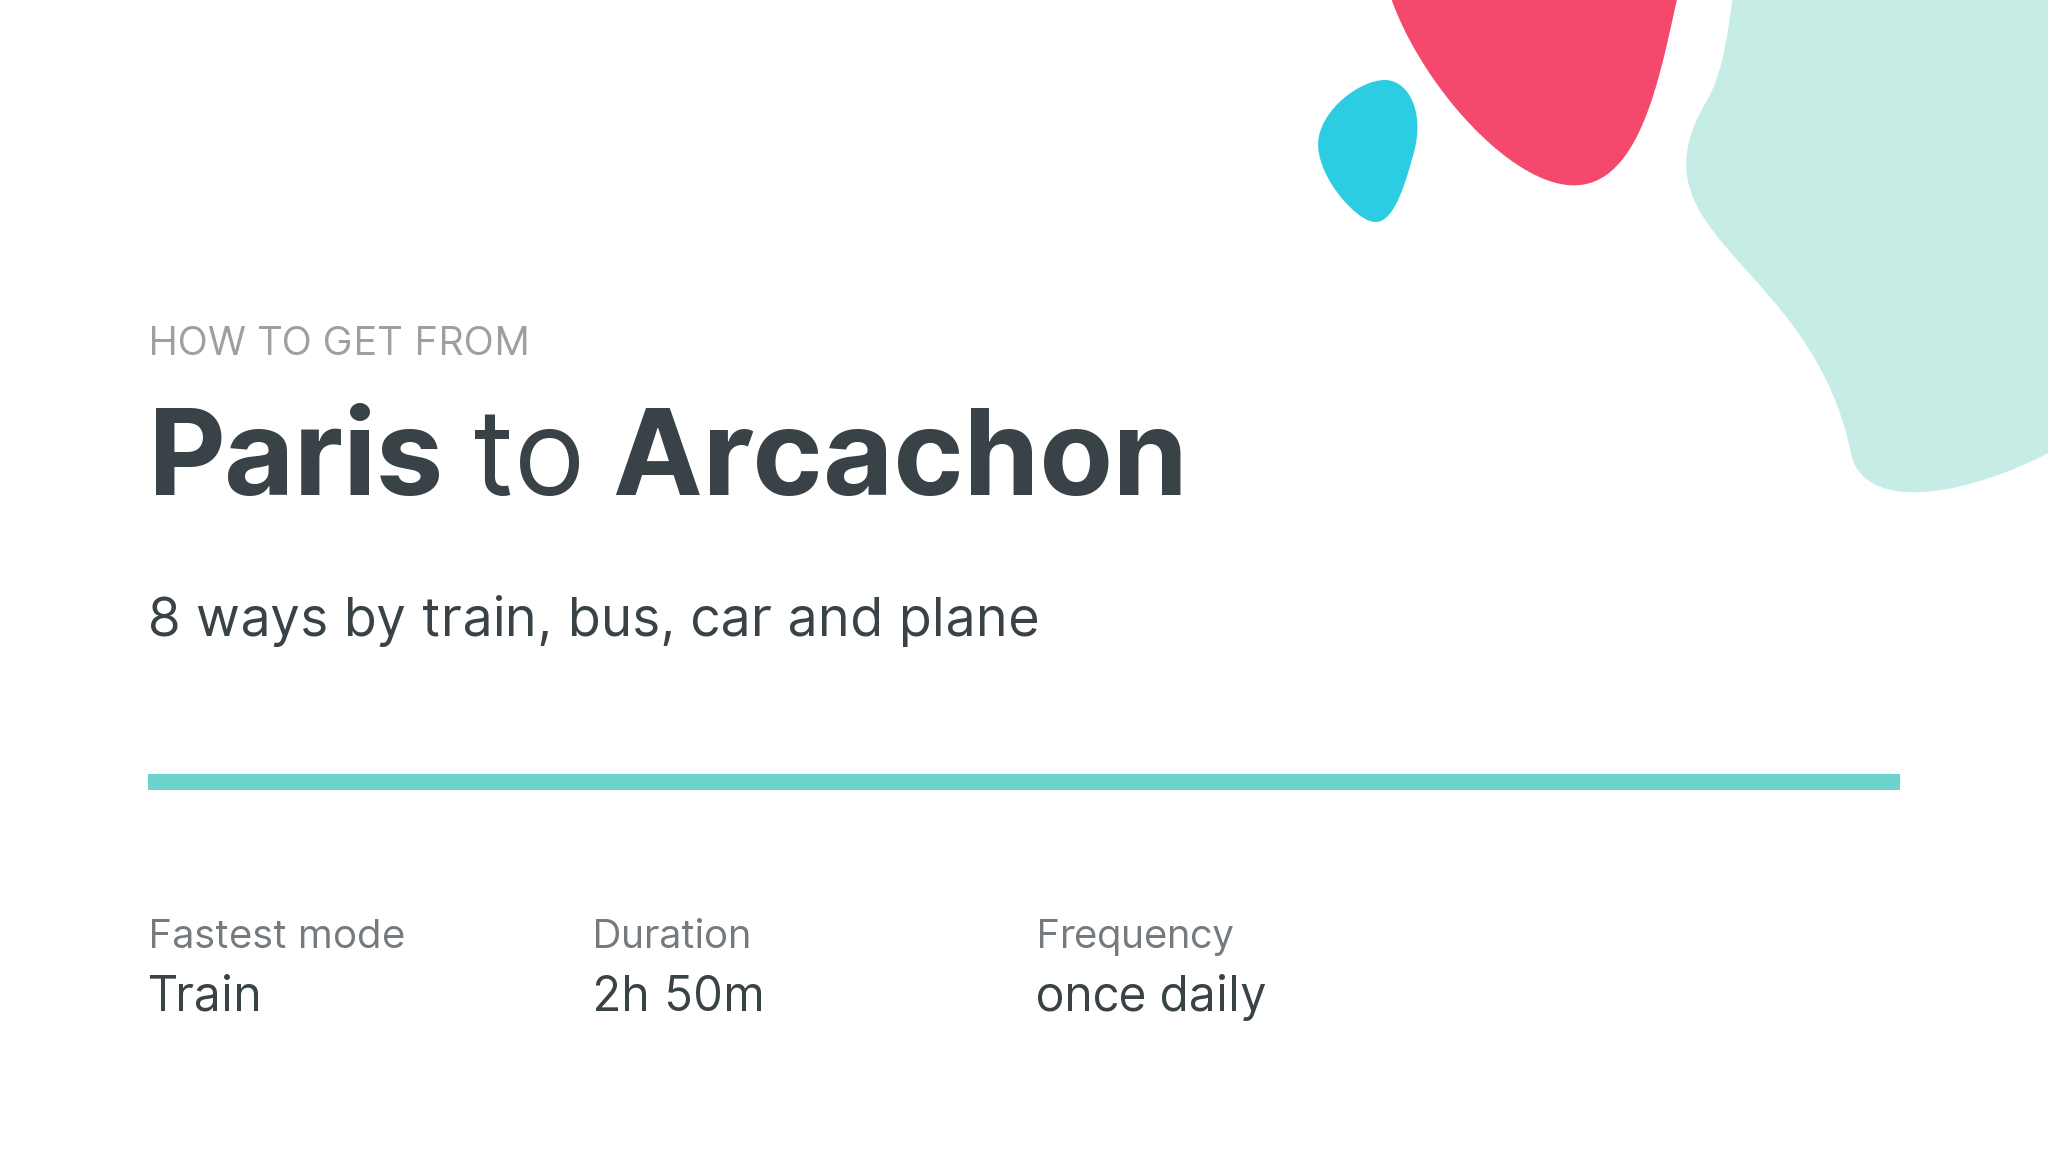 How do I get from Paris to Arcachon